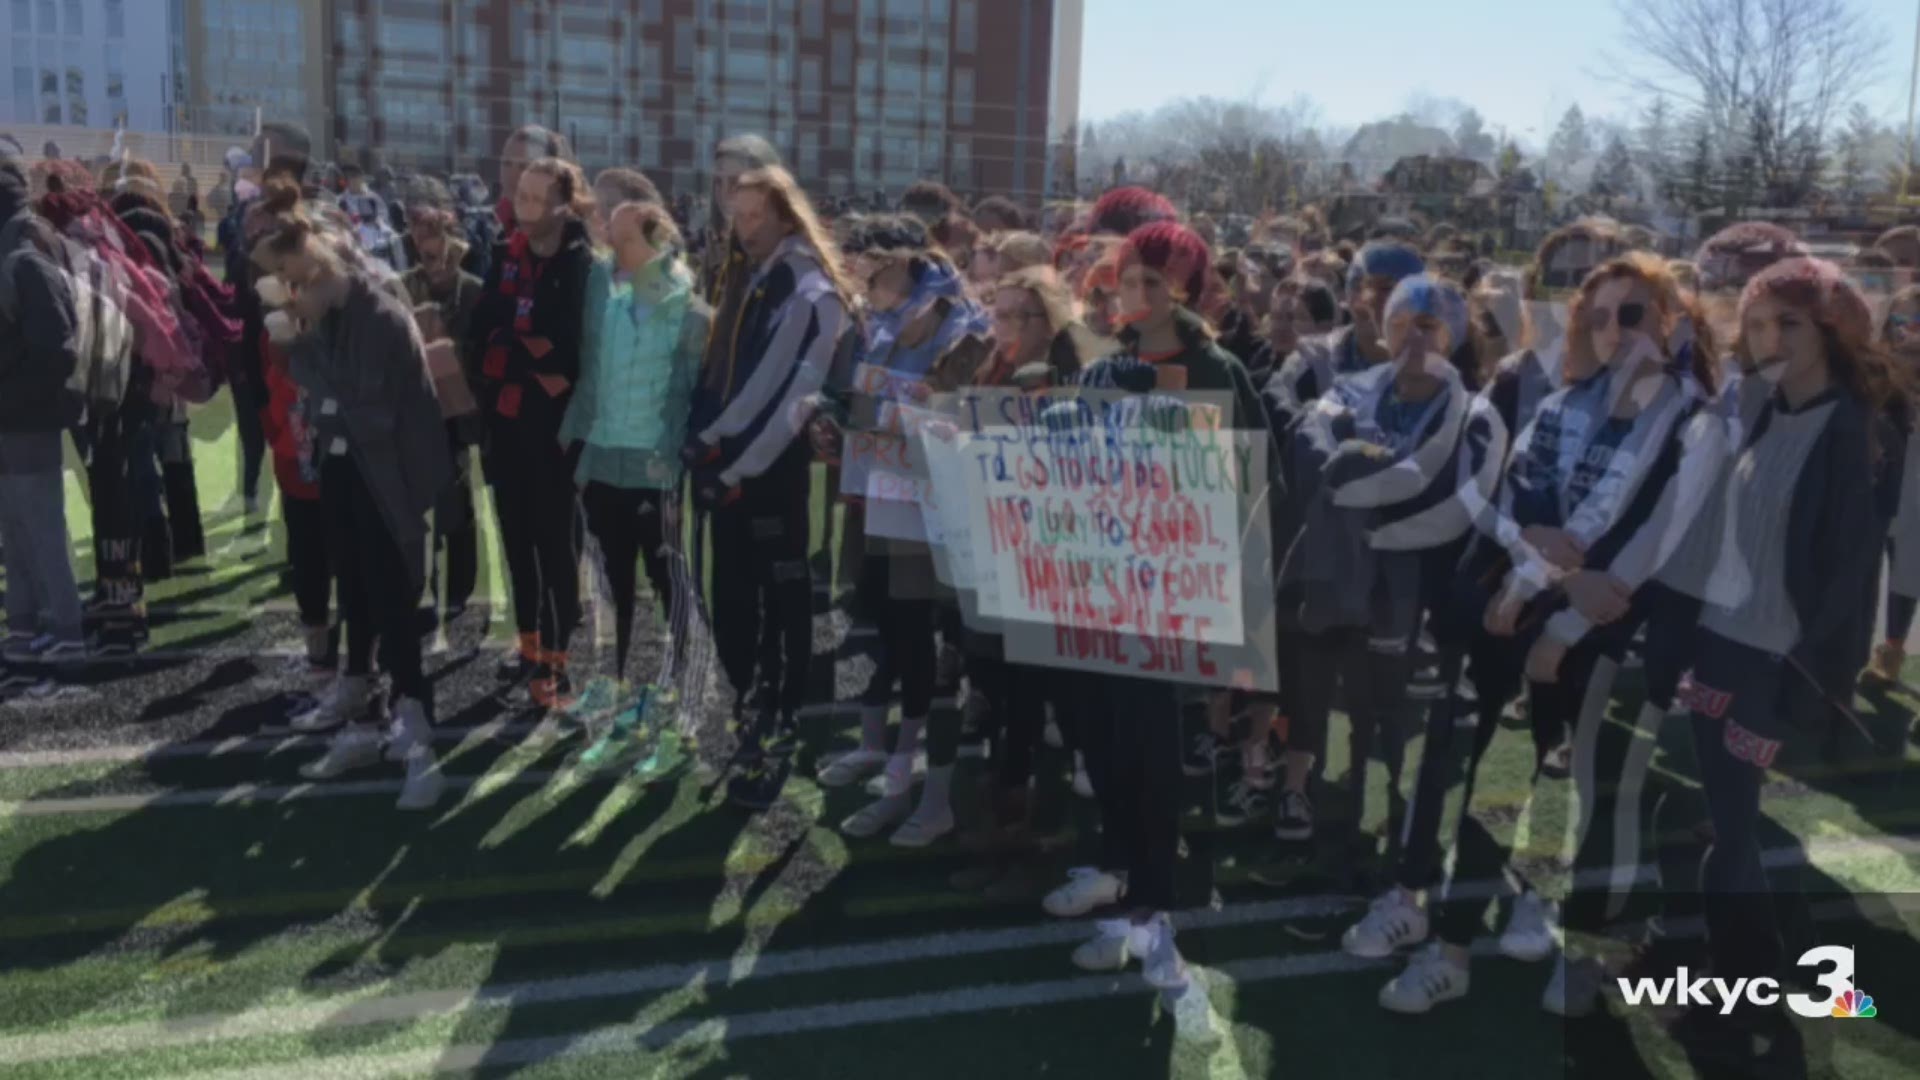 April 20, 2018: Students at Cleveland Heights High School were among thousands nationwide participating in another walkout to push for gun control.